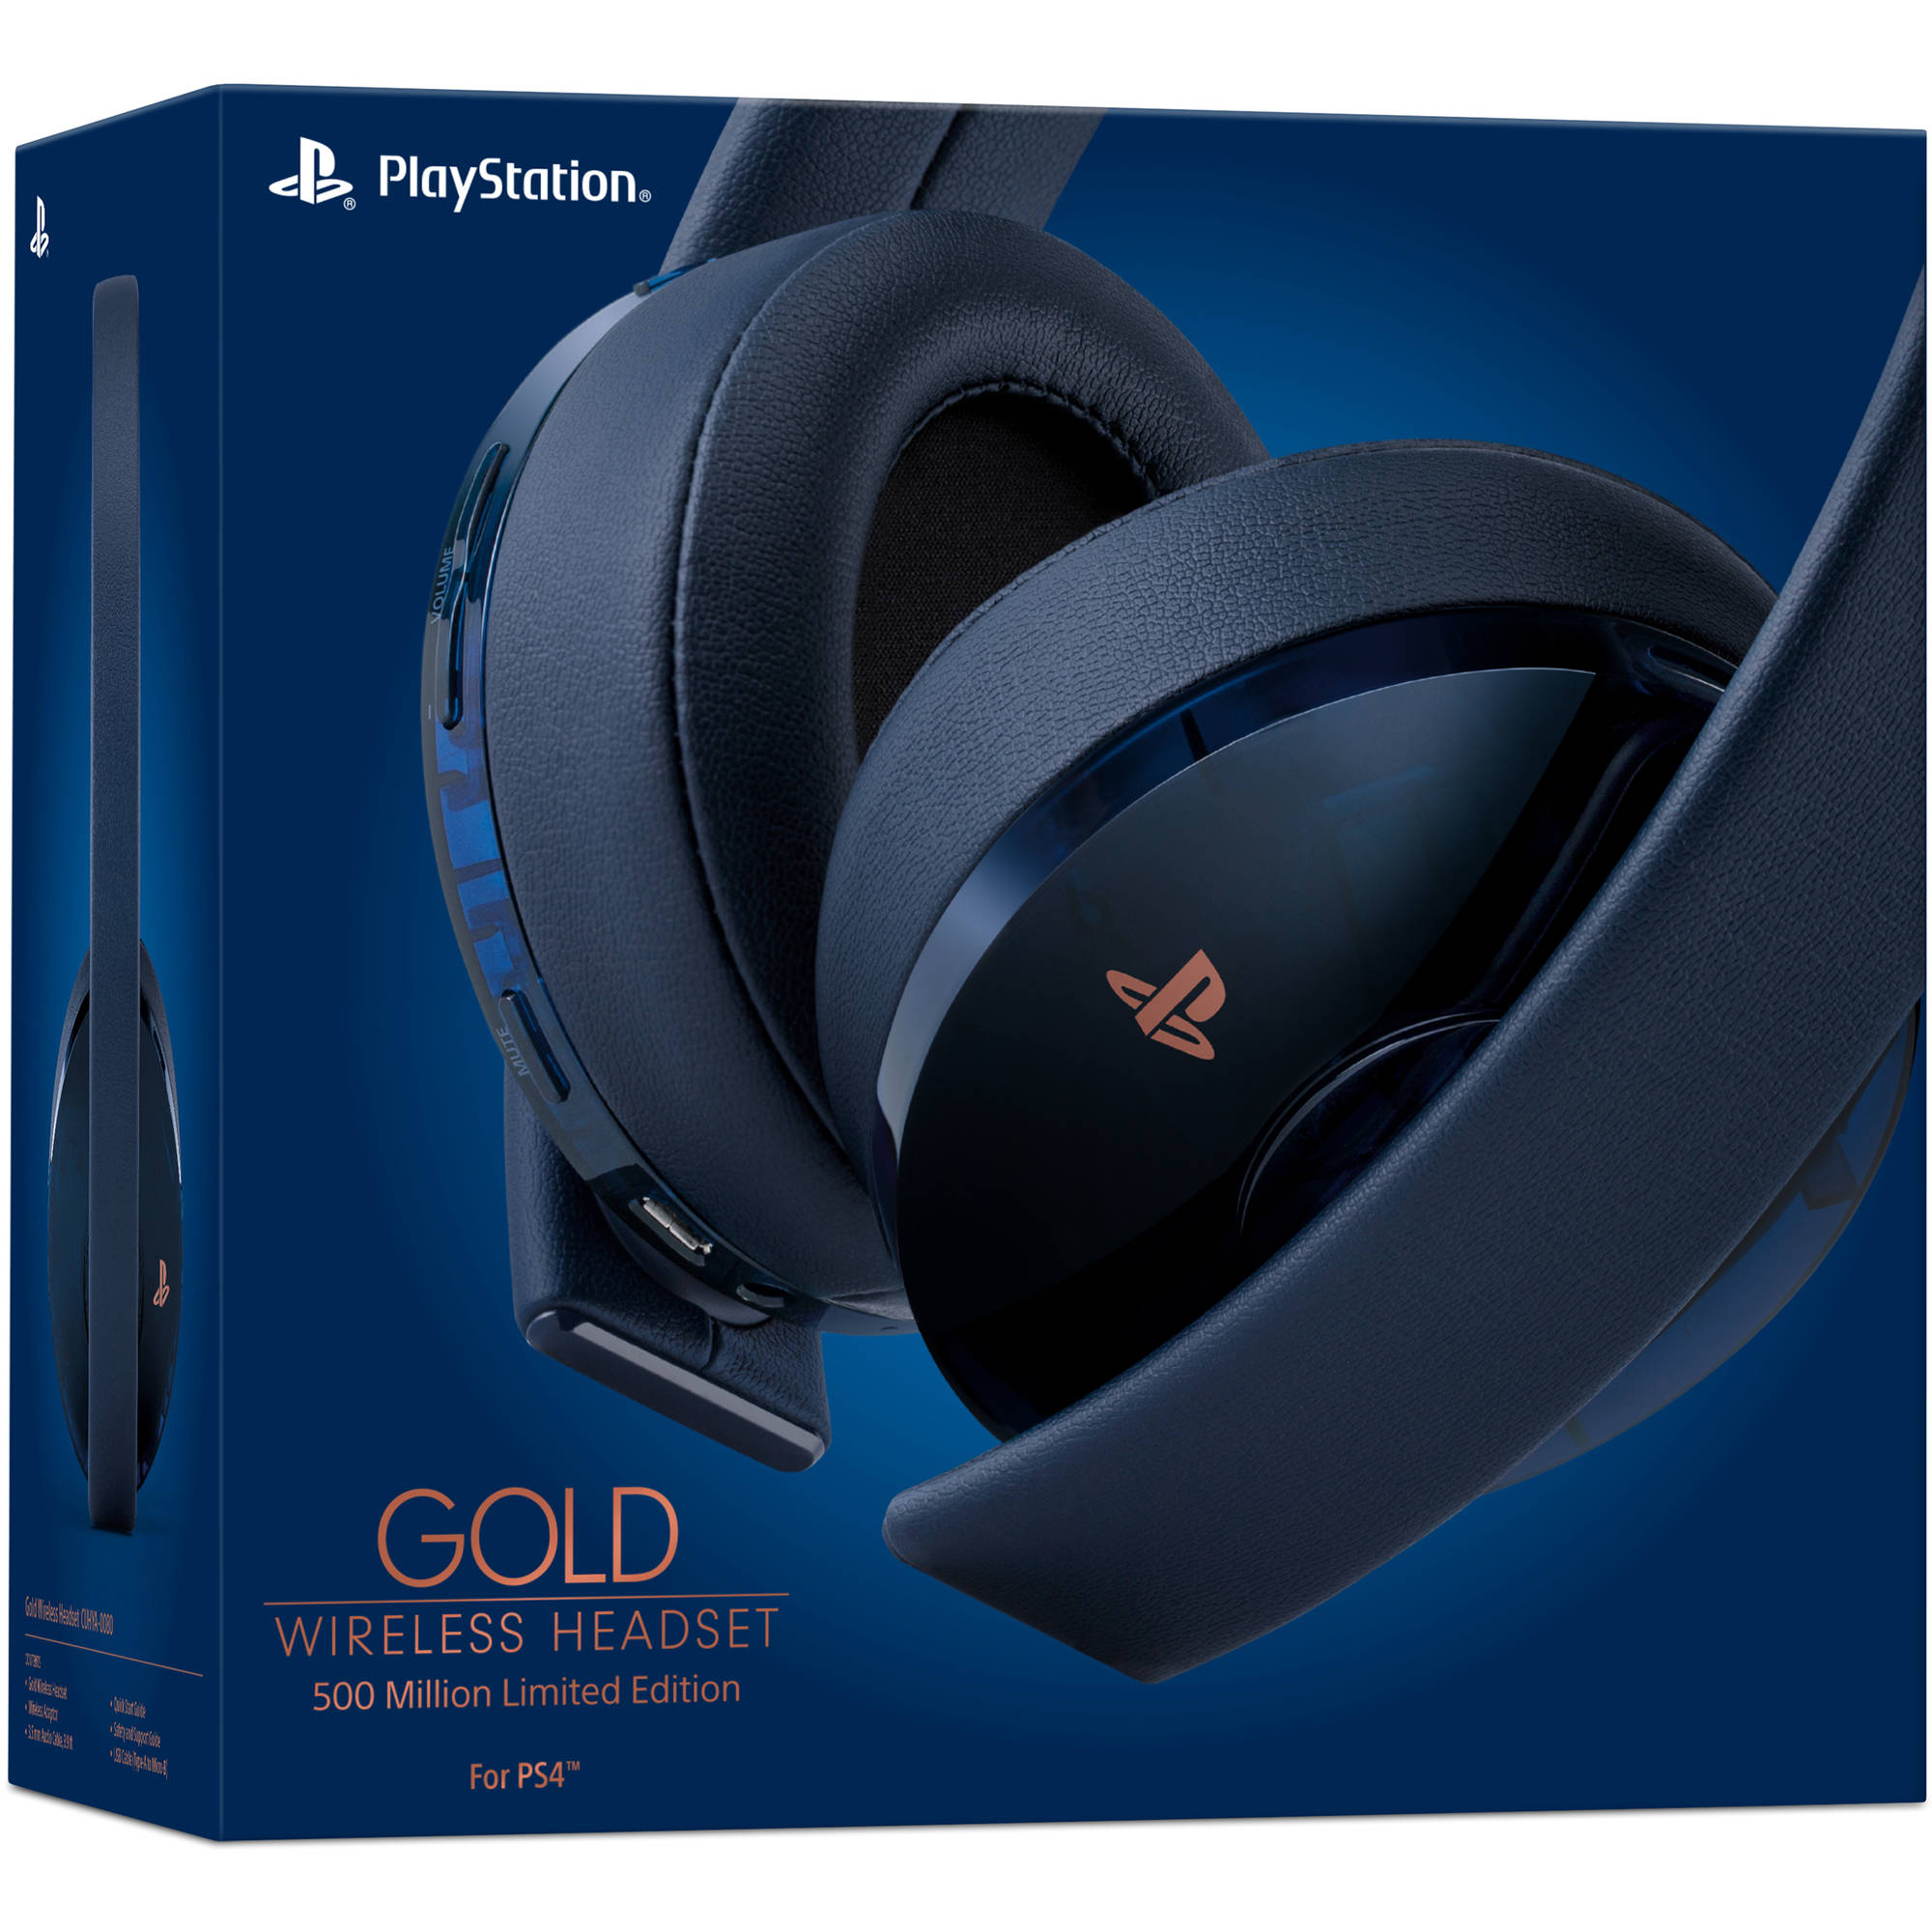 new playstation gold headset